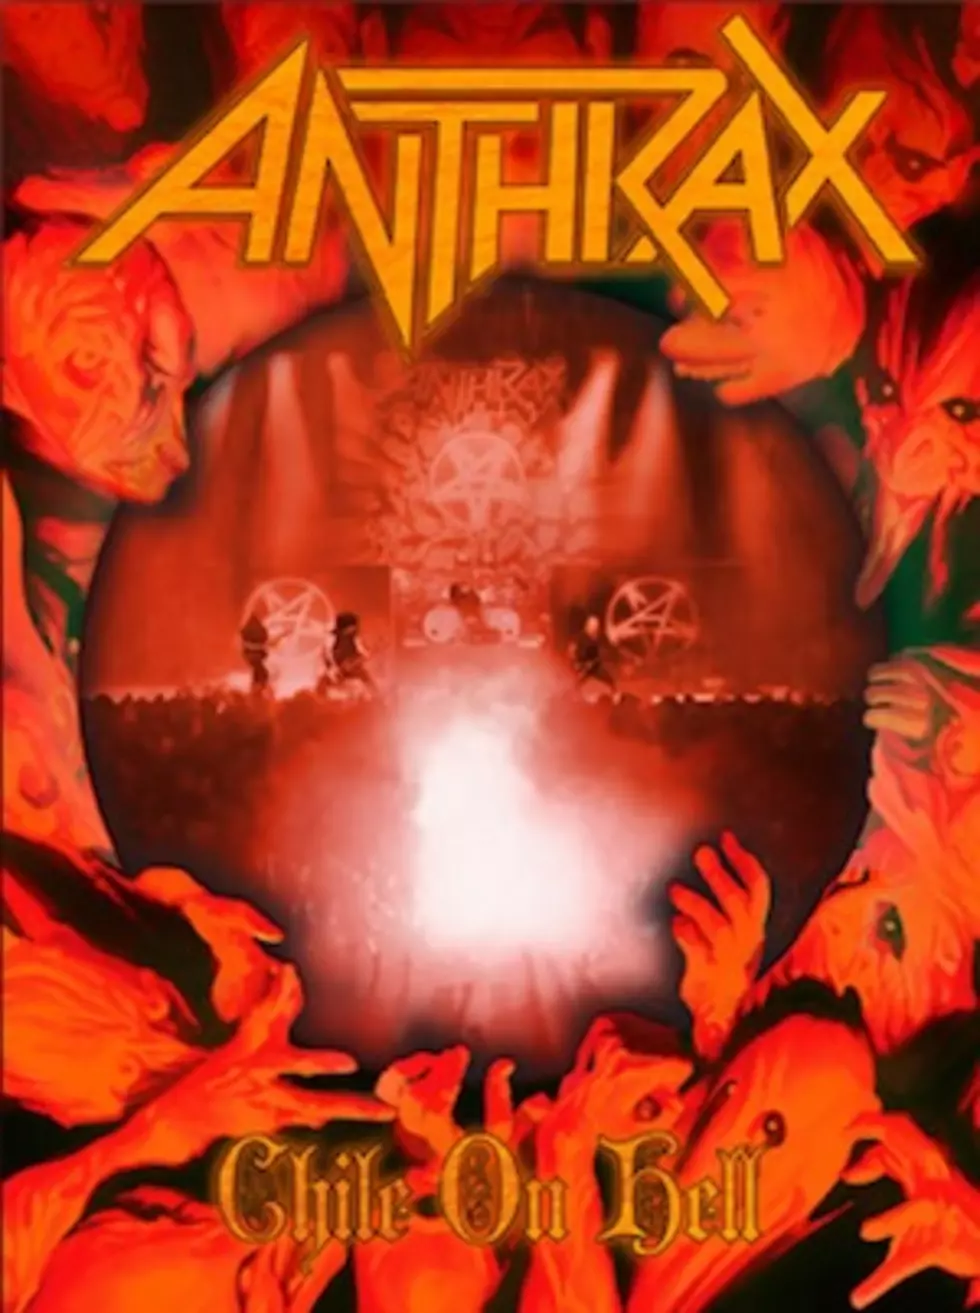 Anthrax Prep &#8216;Chile on Hell&#8217; Concert DVD